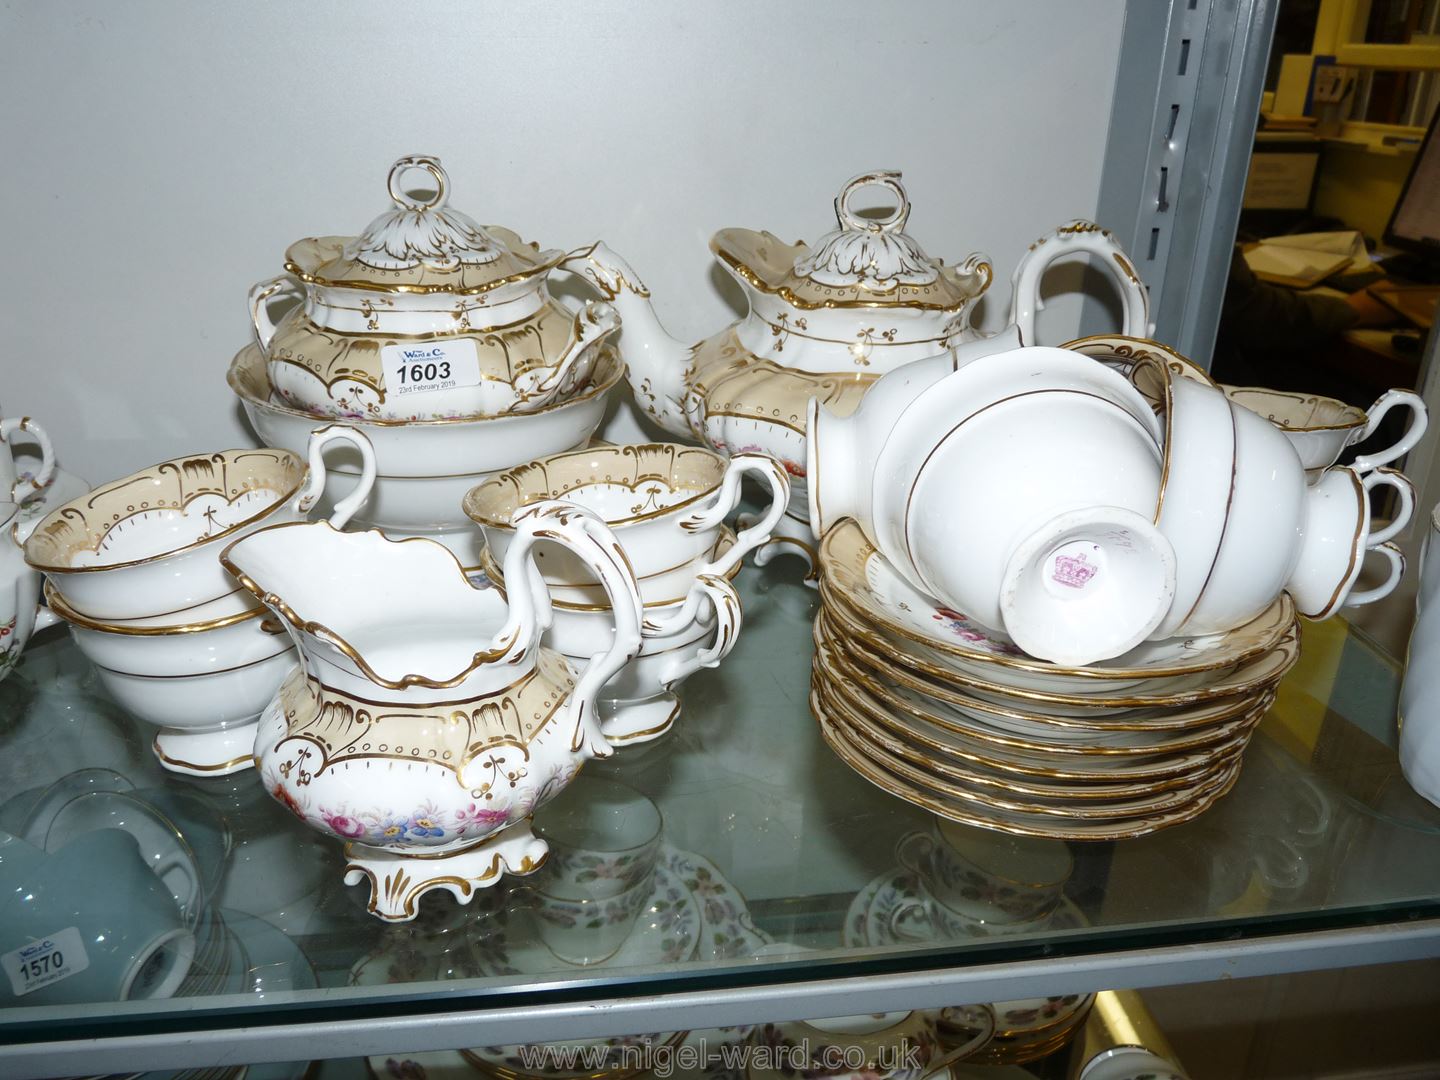 An early Victorian Teaset in the Rockingham style, white ground with floral pattern,